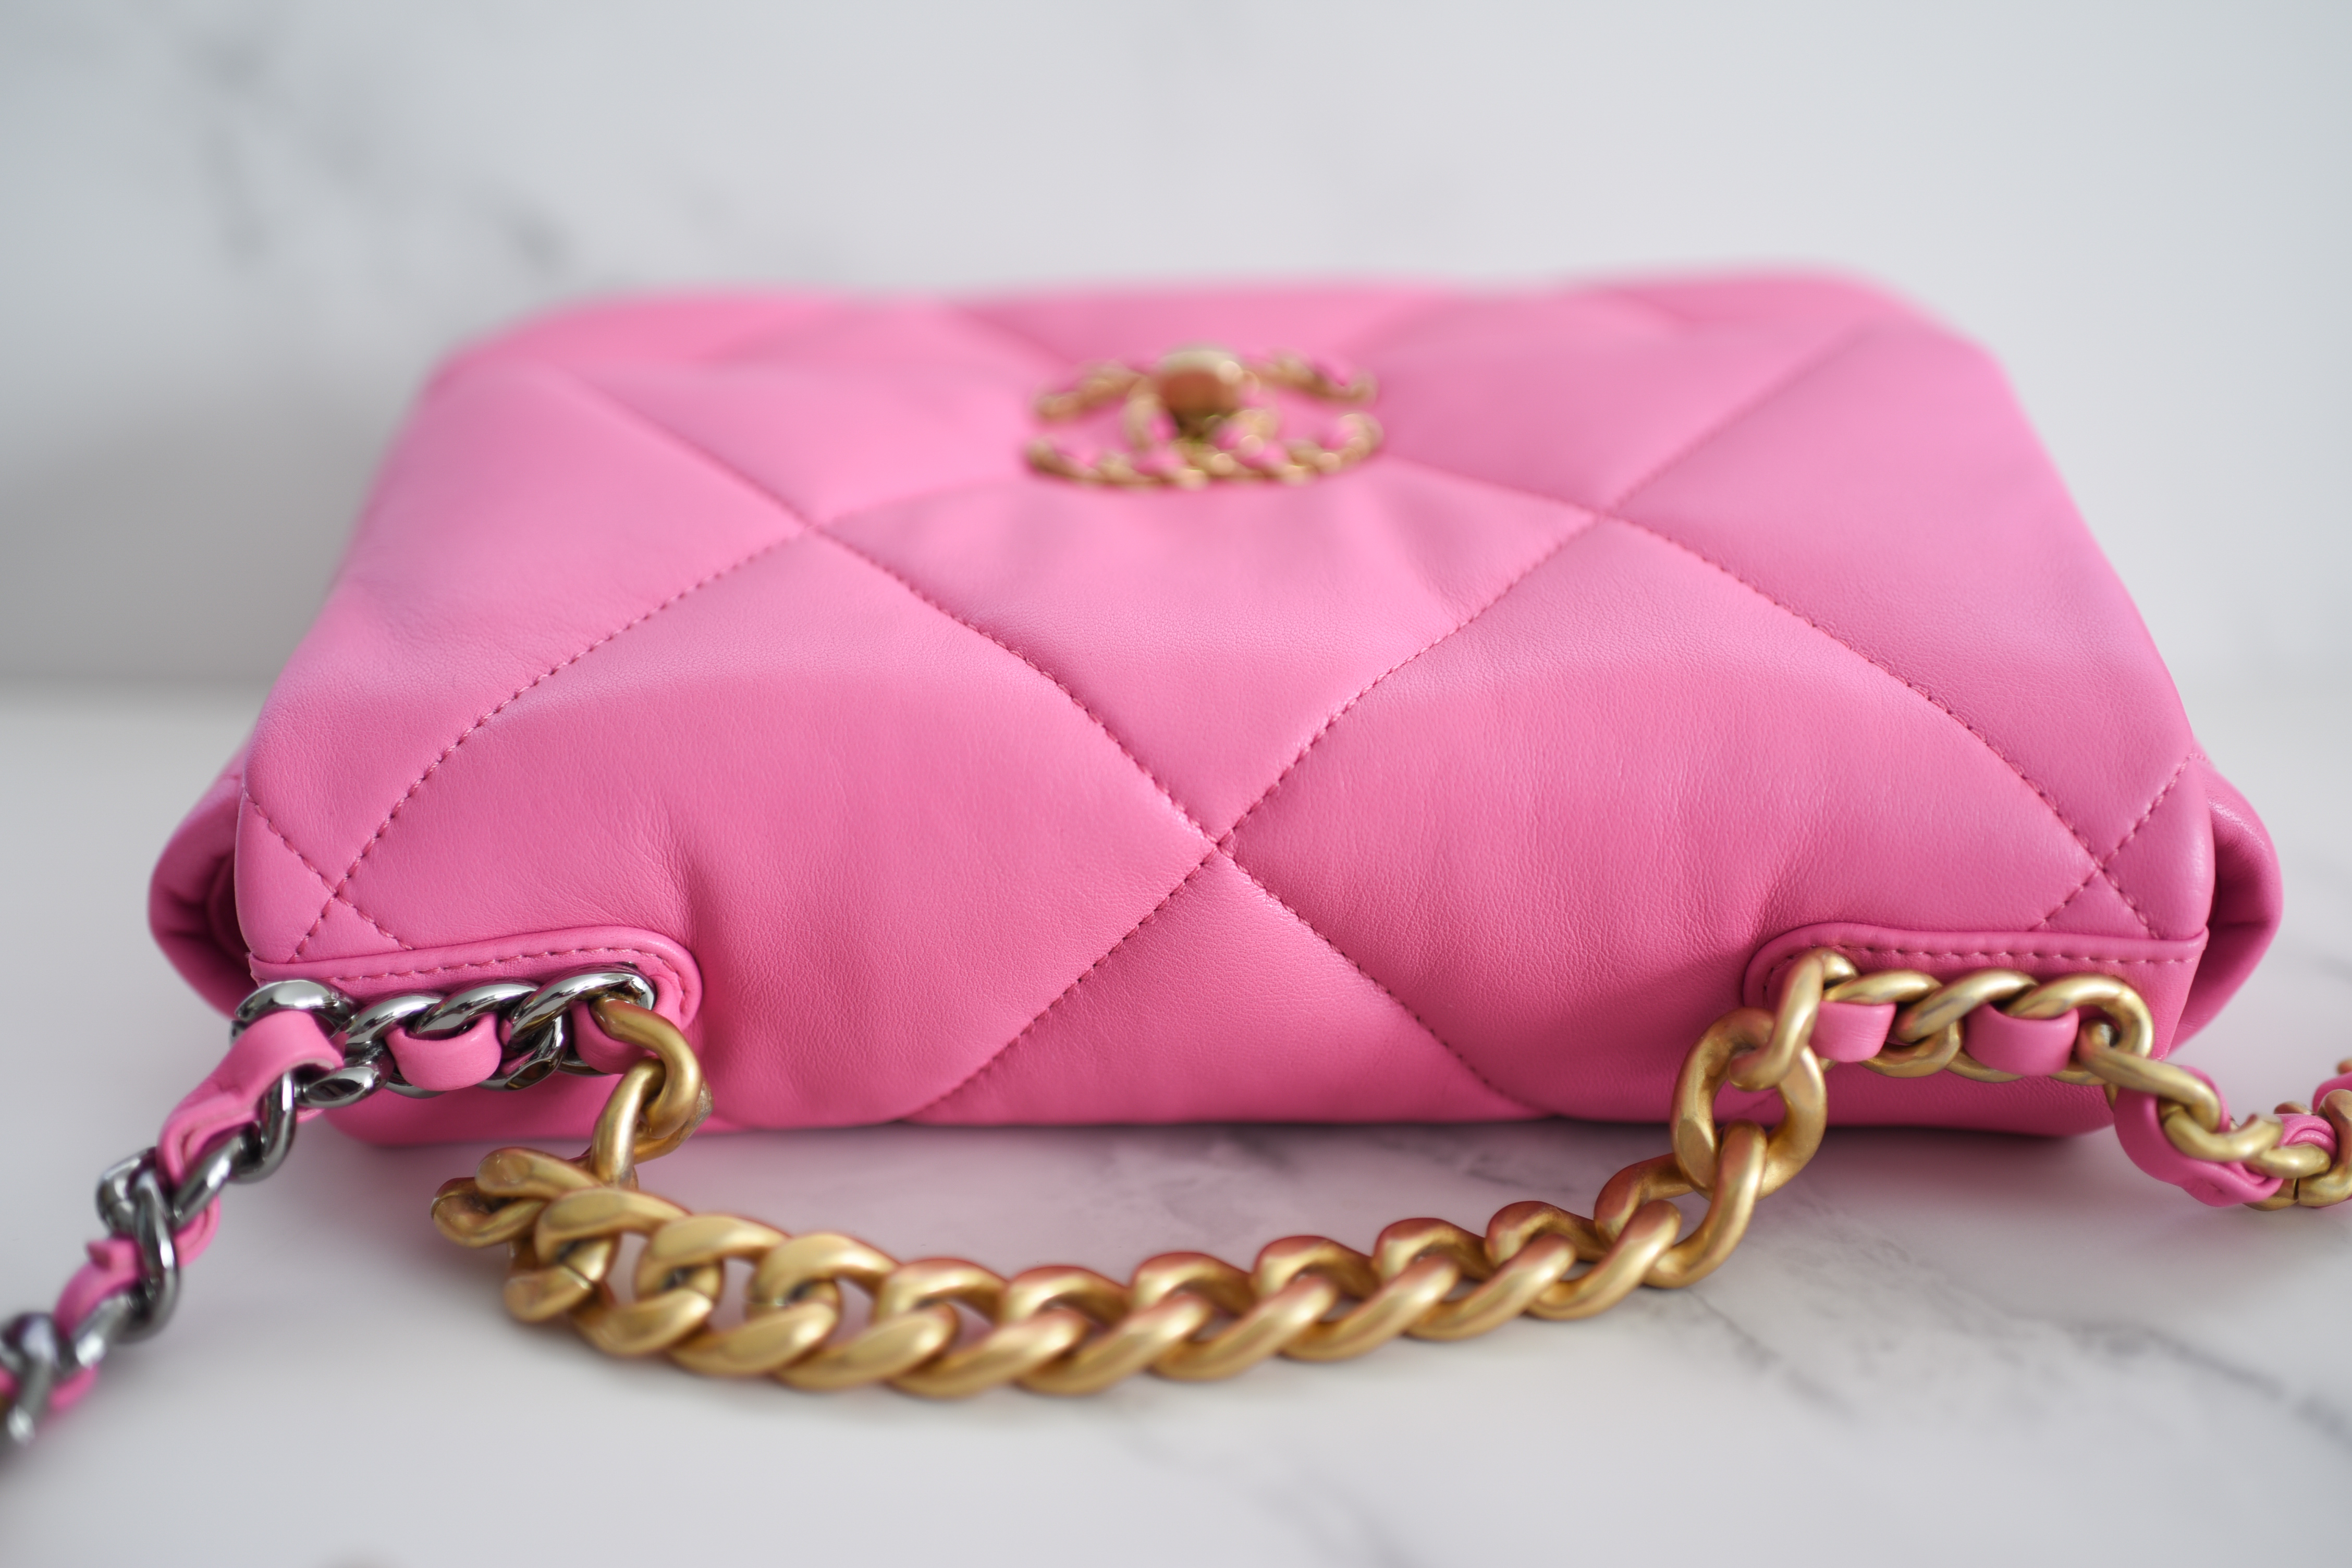 Chanel 19 Pink - 189 For Sale on 1stDibs